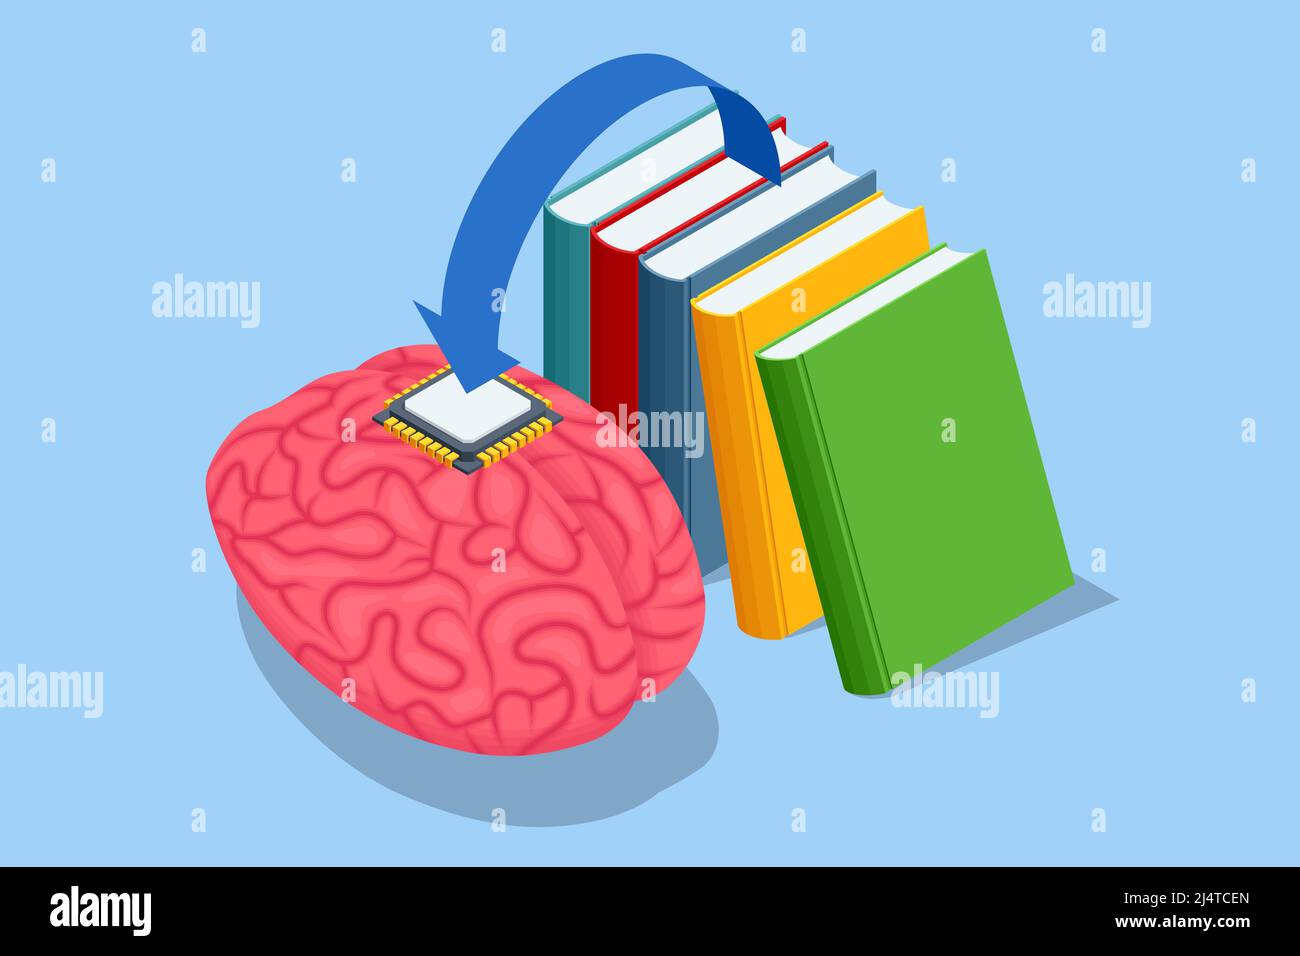 Isometric human brain with micro chip. artificial intelligence and implants of artificial organs. Stock Vector